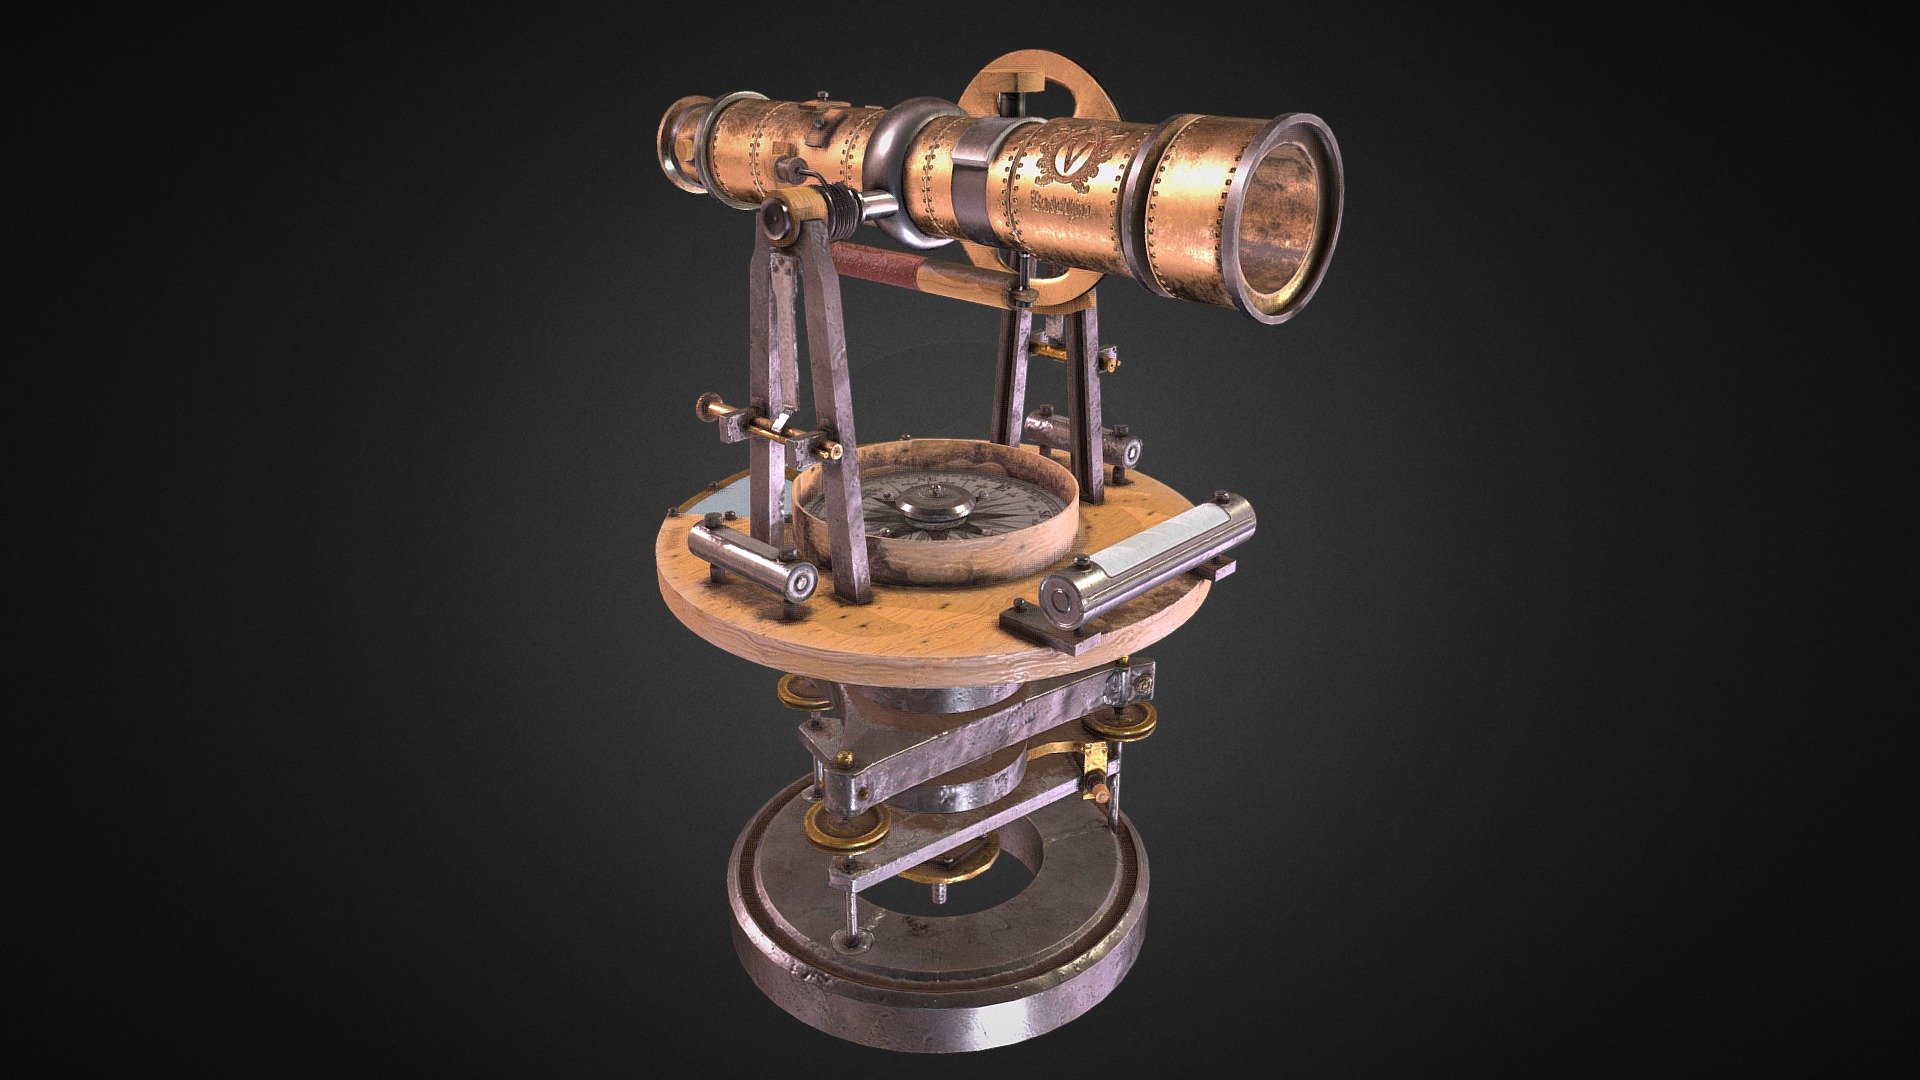 This Telescope was made for a student project “The Eternitarium” to be placed in the libary scene. All together took around 1 day to make and texture. 

Any feedback would be much appriciated! - Telescope - 3D model by samkaewkhiao 3d model